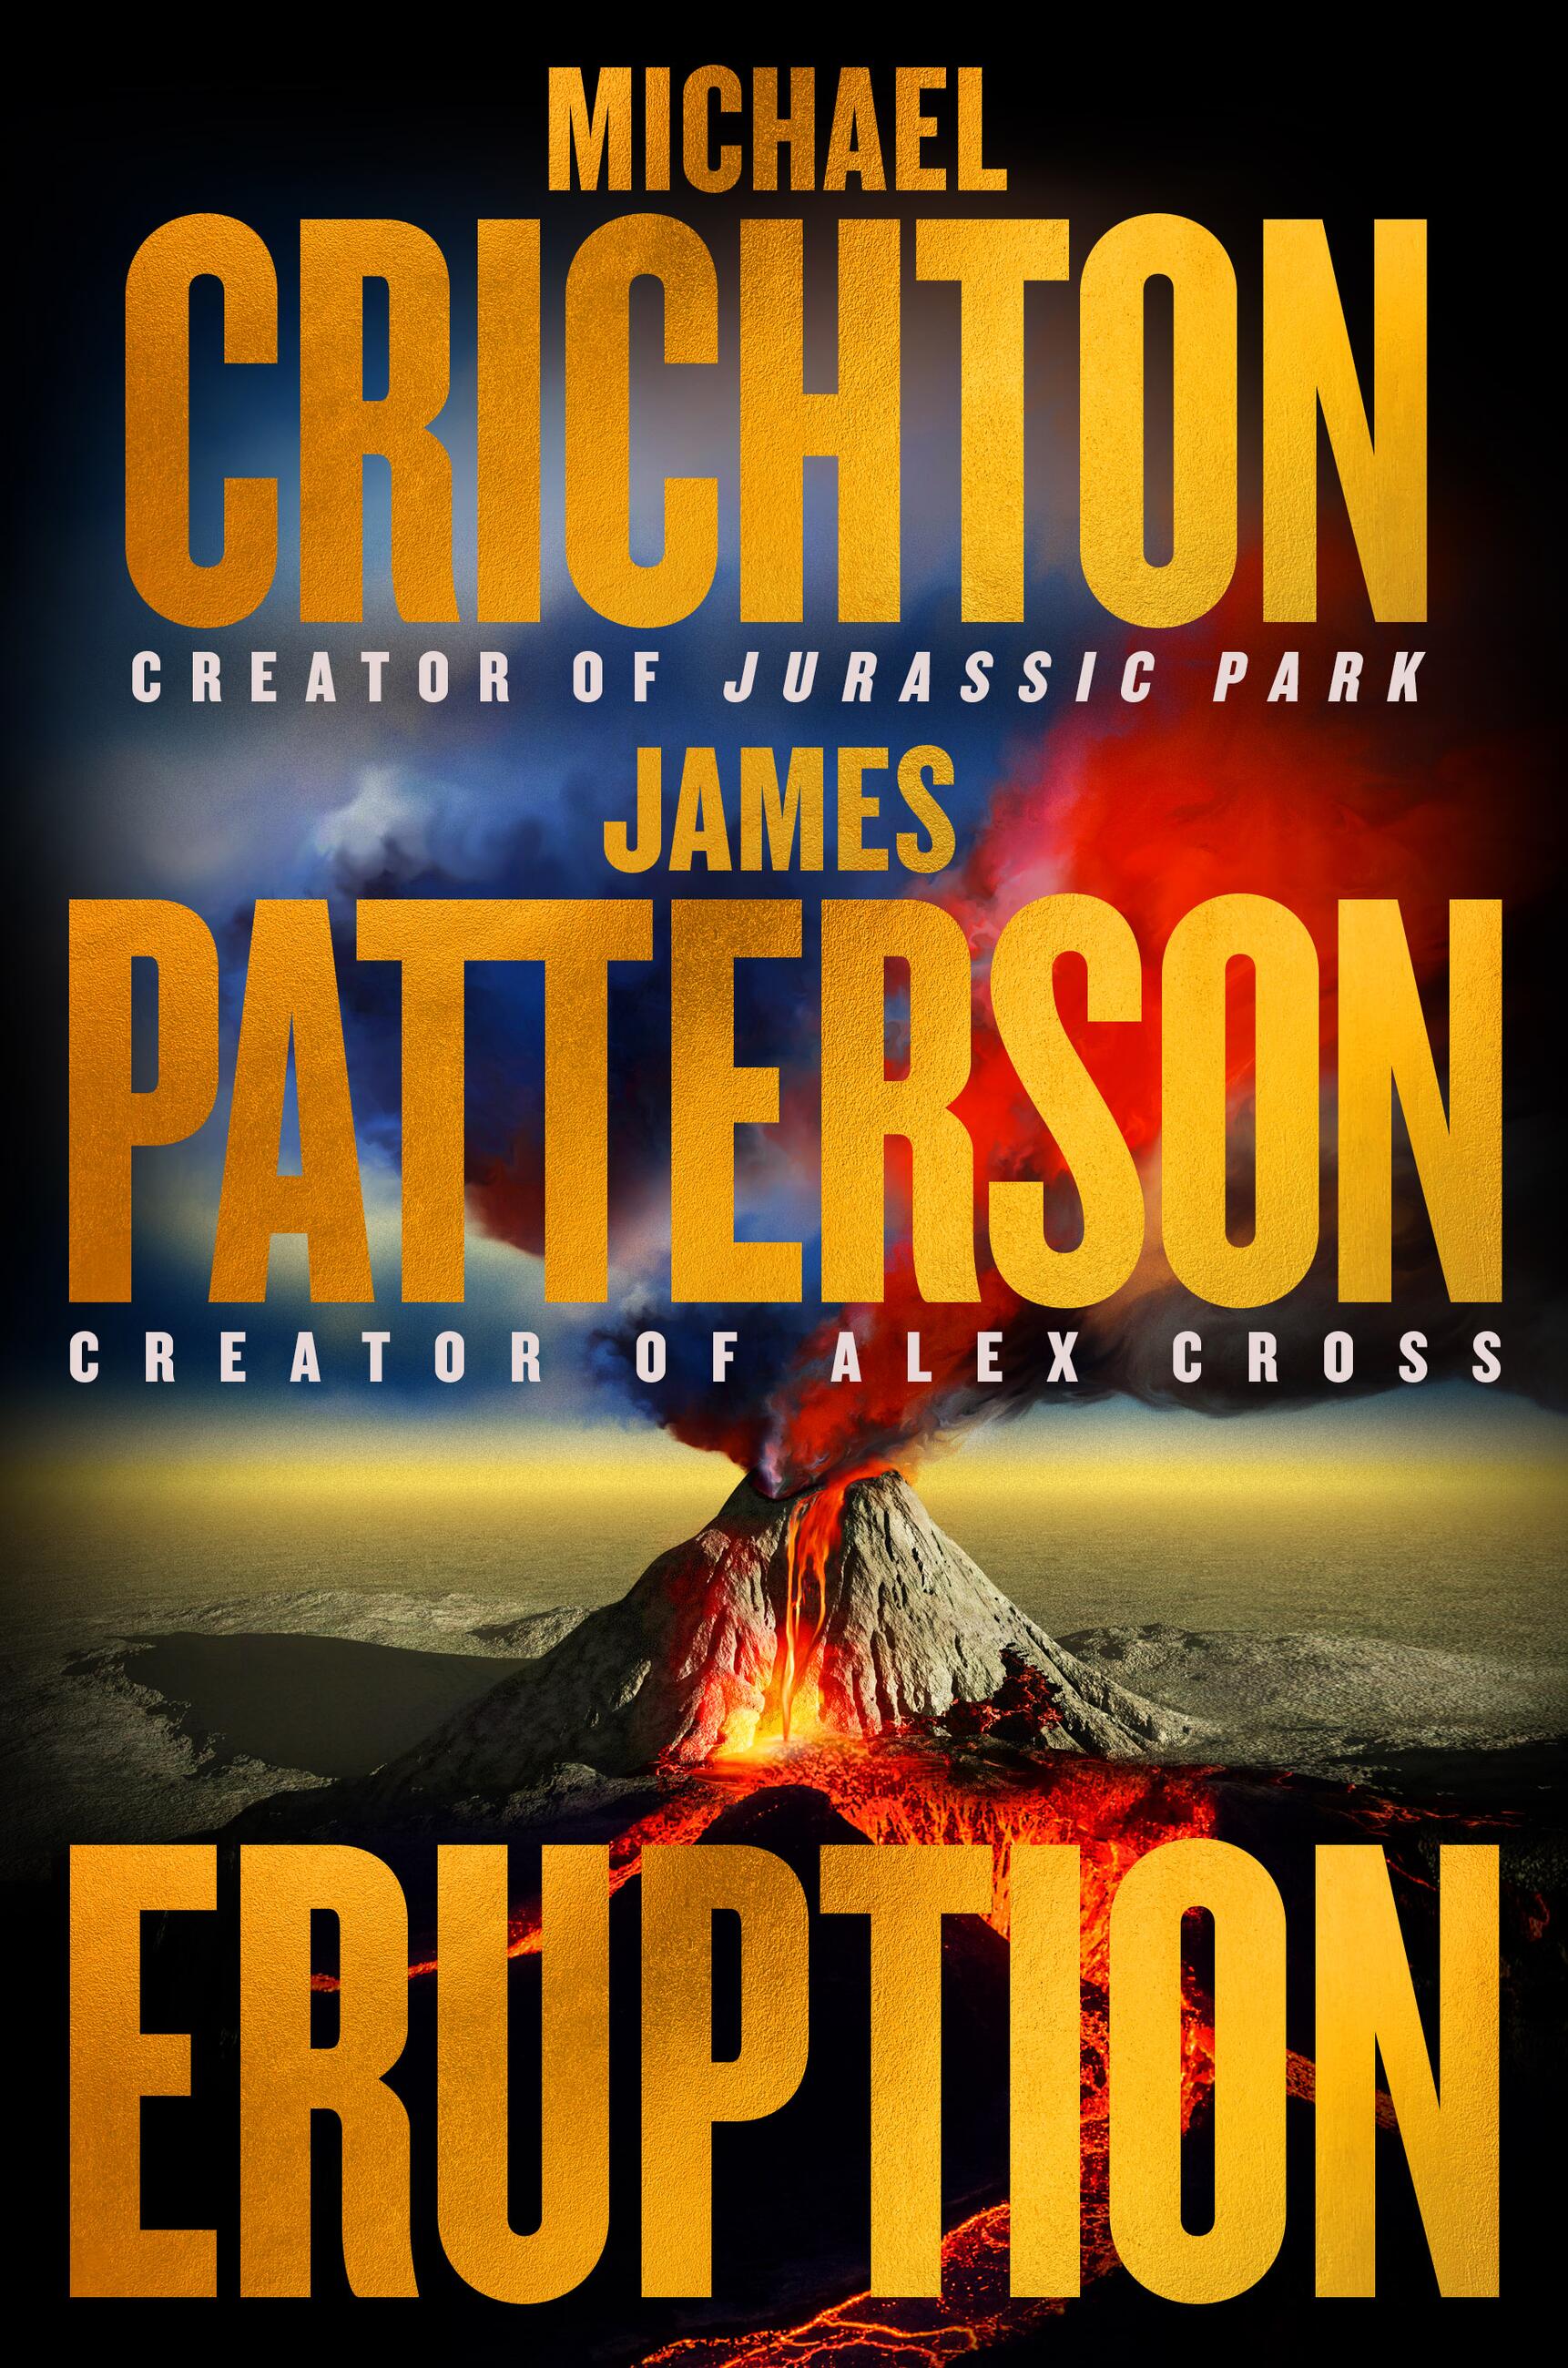 Eruption by Michael Crichton and James Patterson